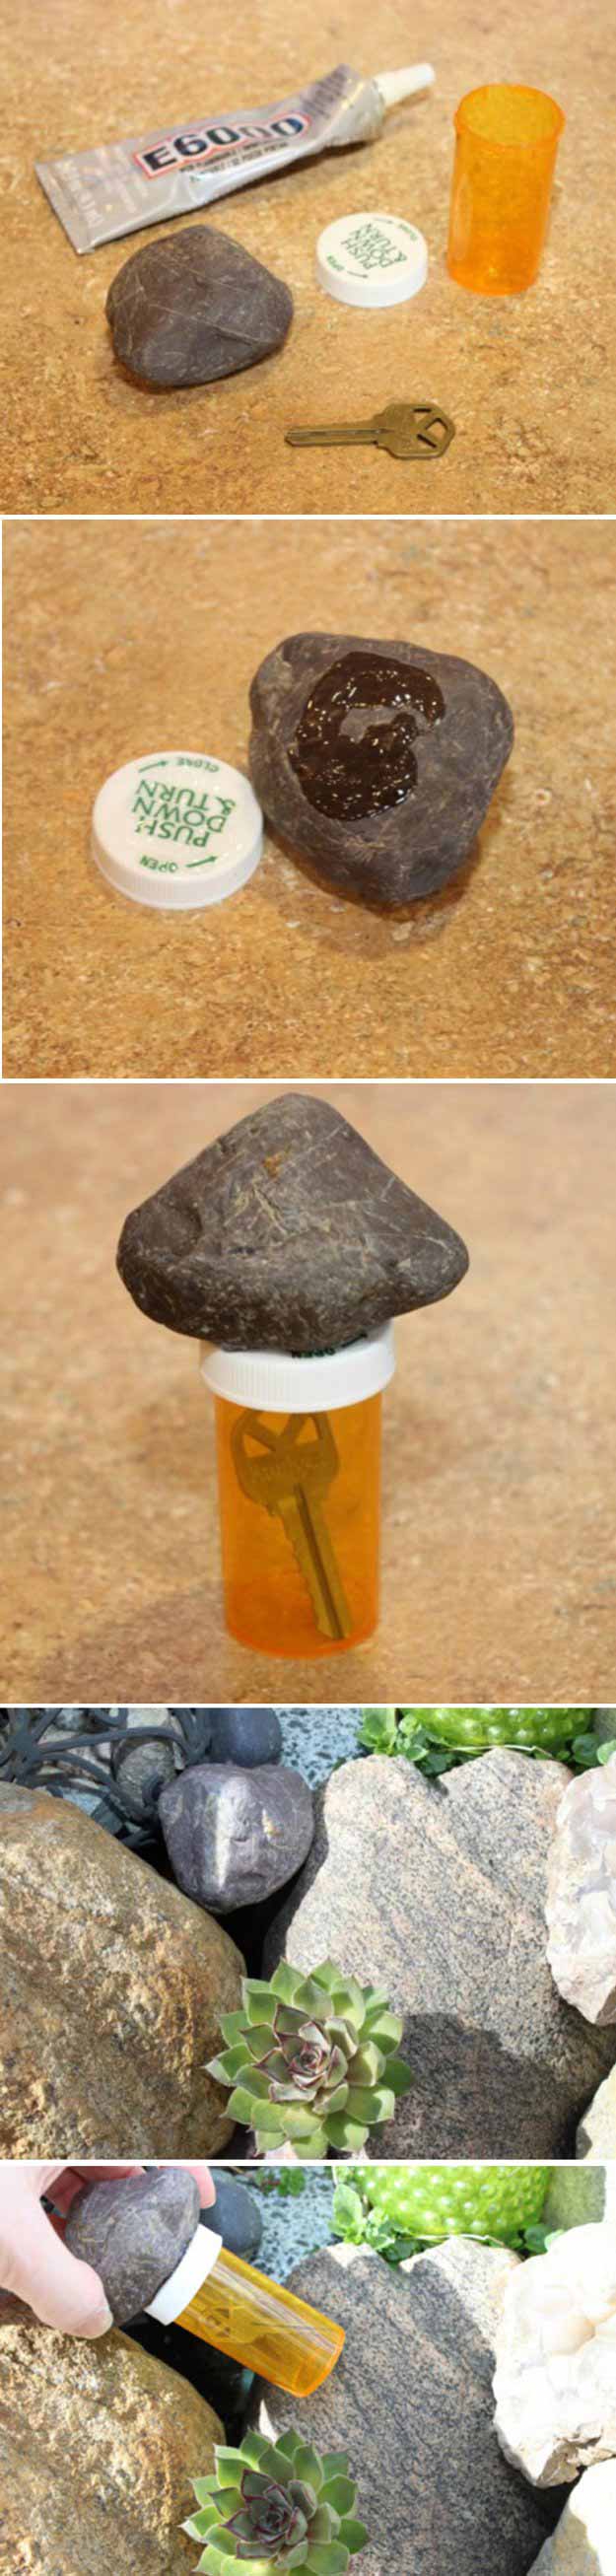 Awesome-DIY-Uses-for-Pill-Bottles-Concealed-Key